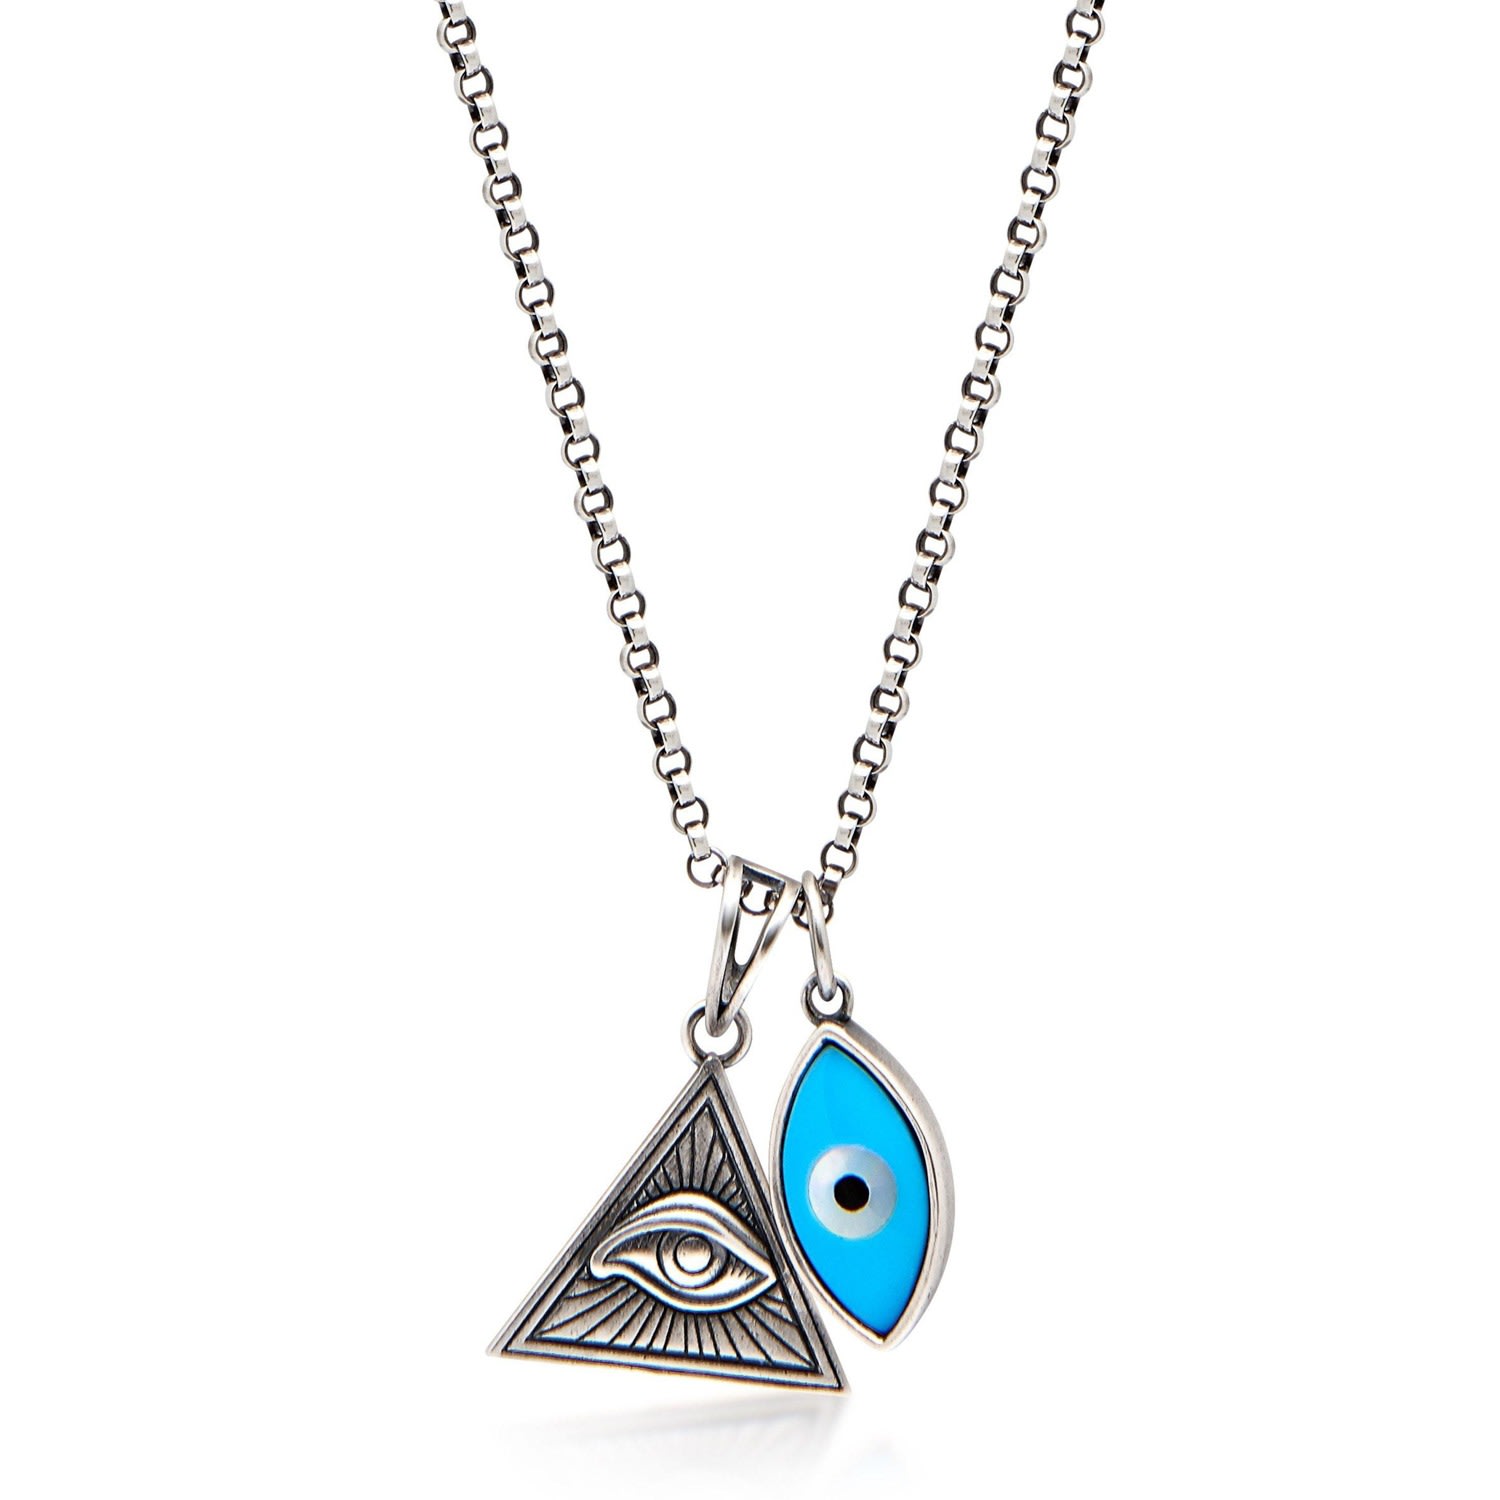 Men’s Silver Necklace With Turquoise Evil Eye And Eye Of Ra Pendant Nialaya